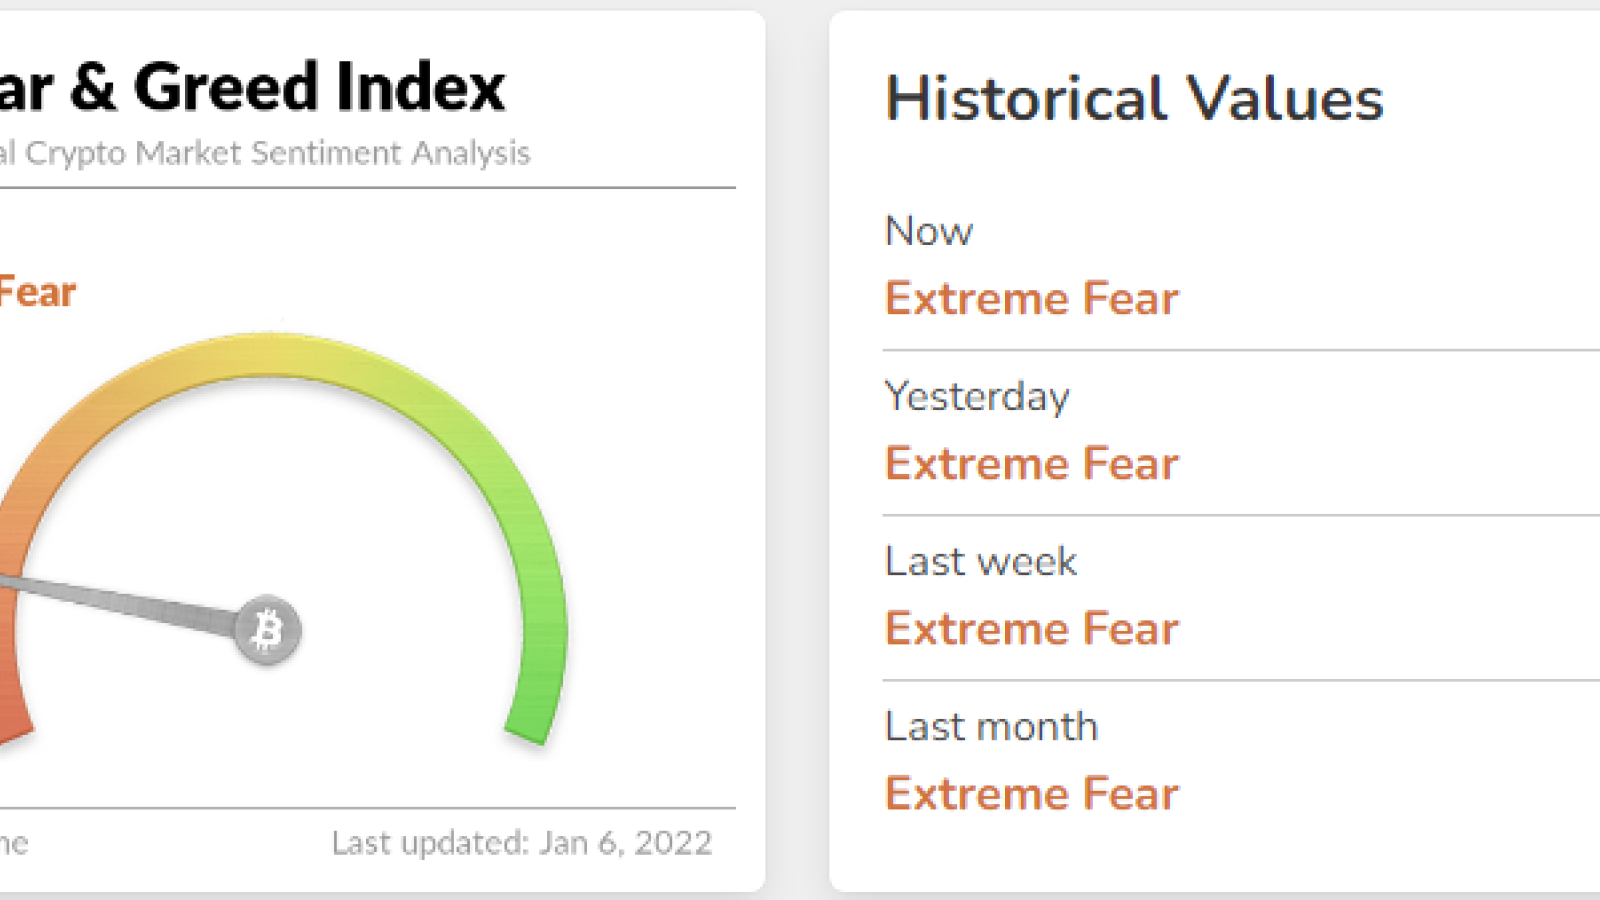 Market Sentiment Shifts into "Extreme Fear" as Market Tumbles. Crypto Fear & Greed Index